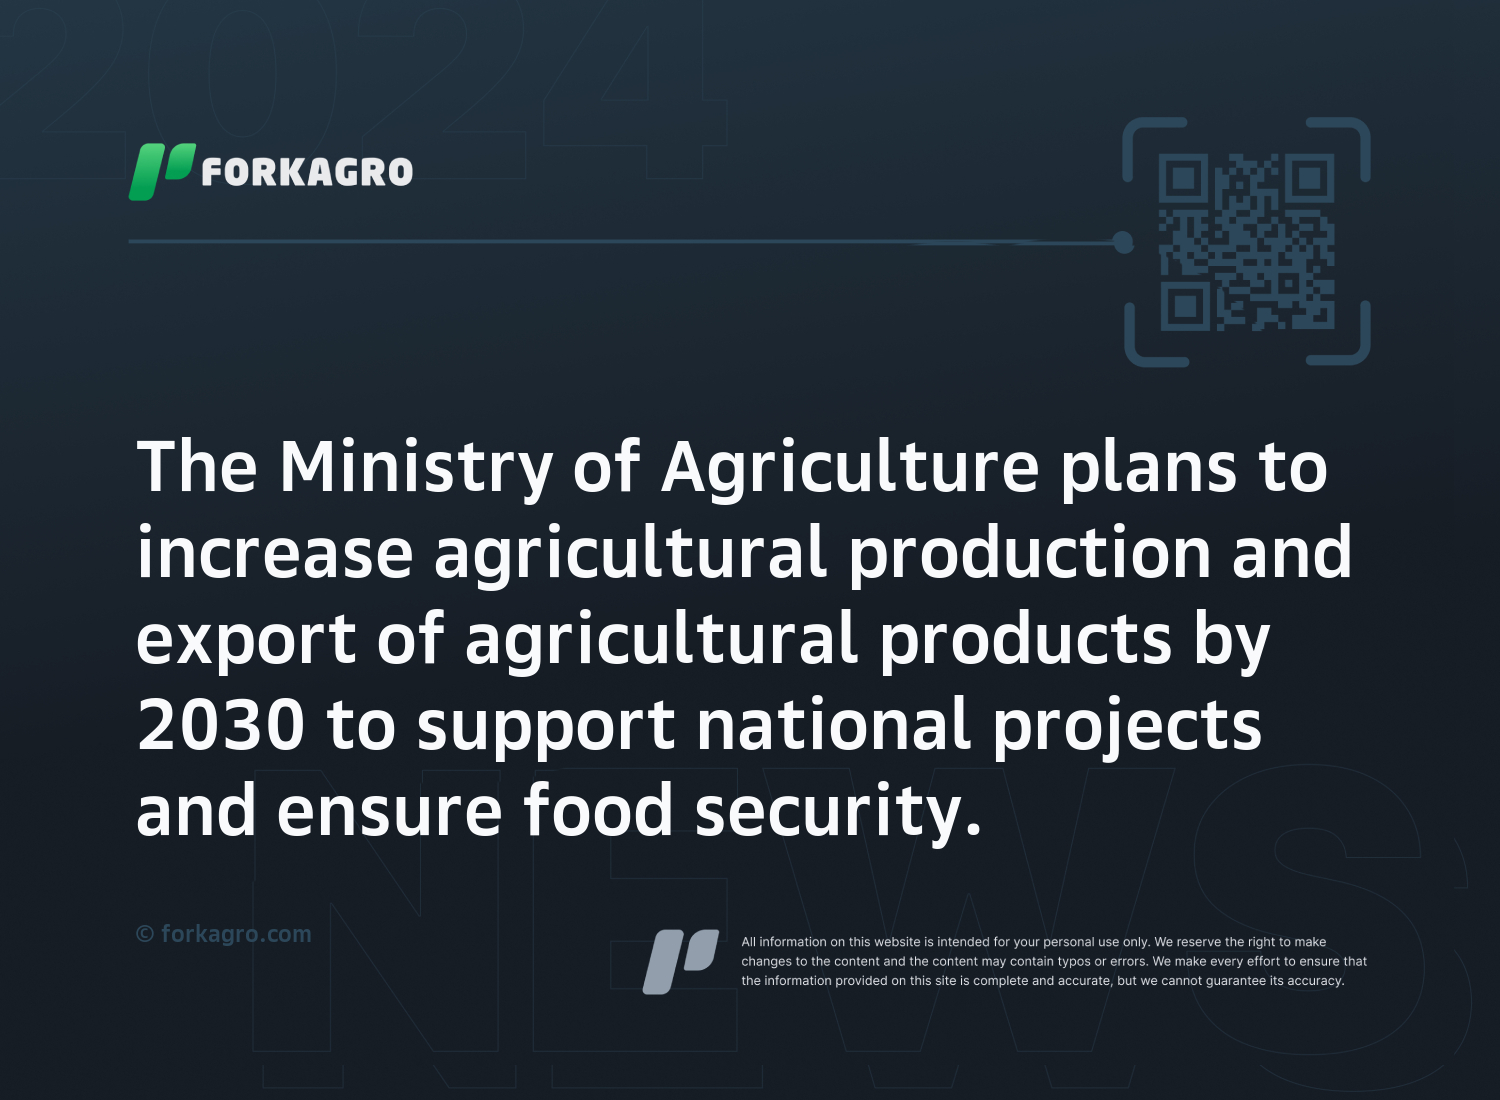 The Ministry of Agriculture plans to increase agricultural production and export of agricultural products by 2030 to support national projects and ensure food security.